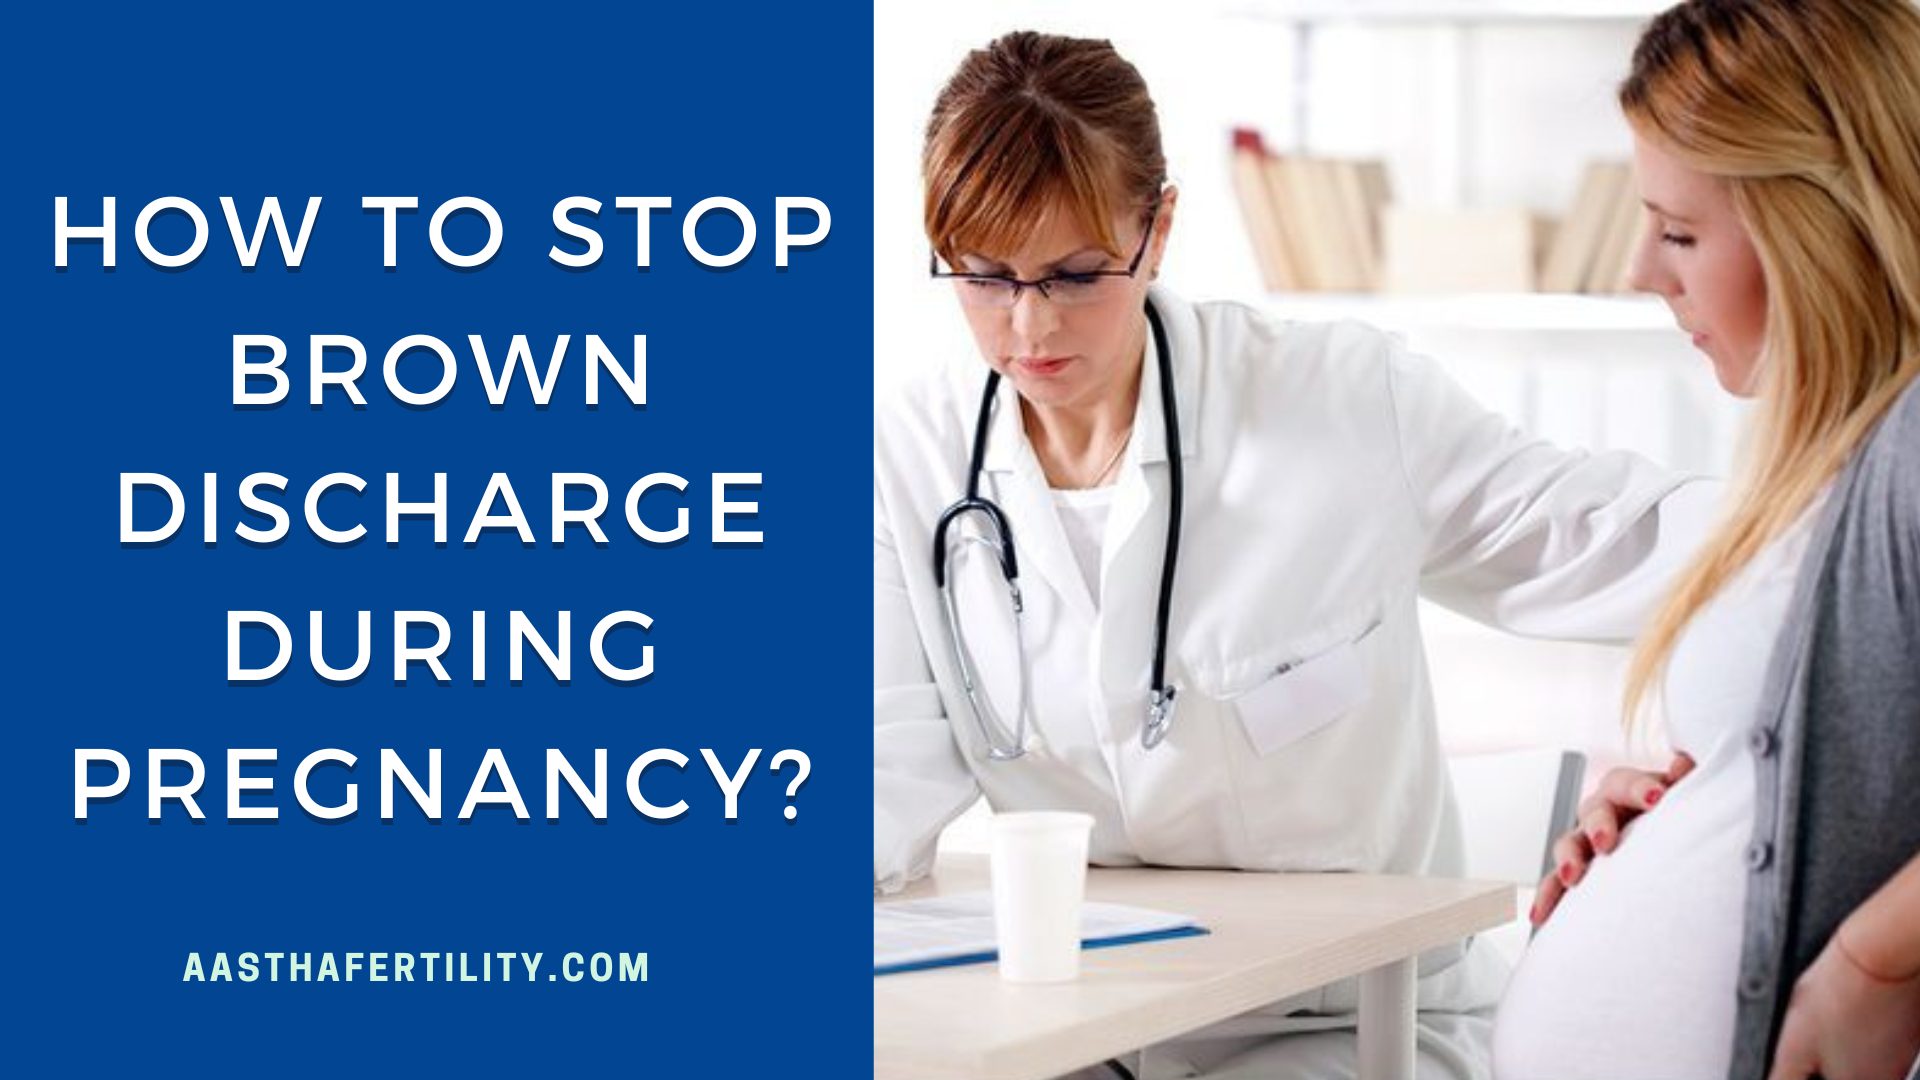 How to Stop Brown Discharge During Pregnancy?